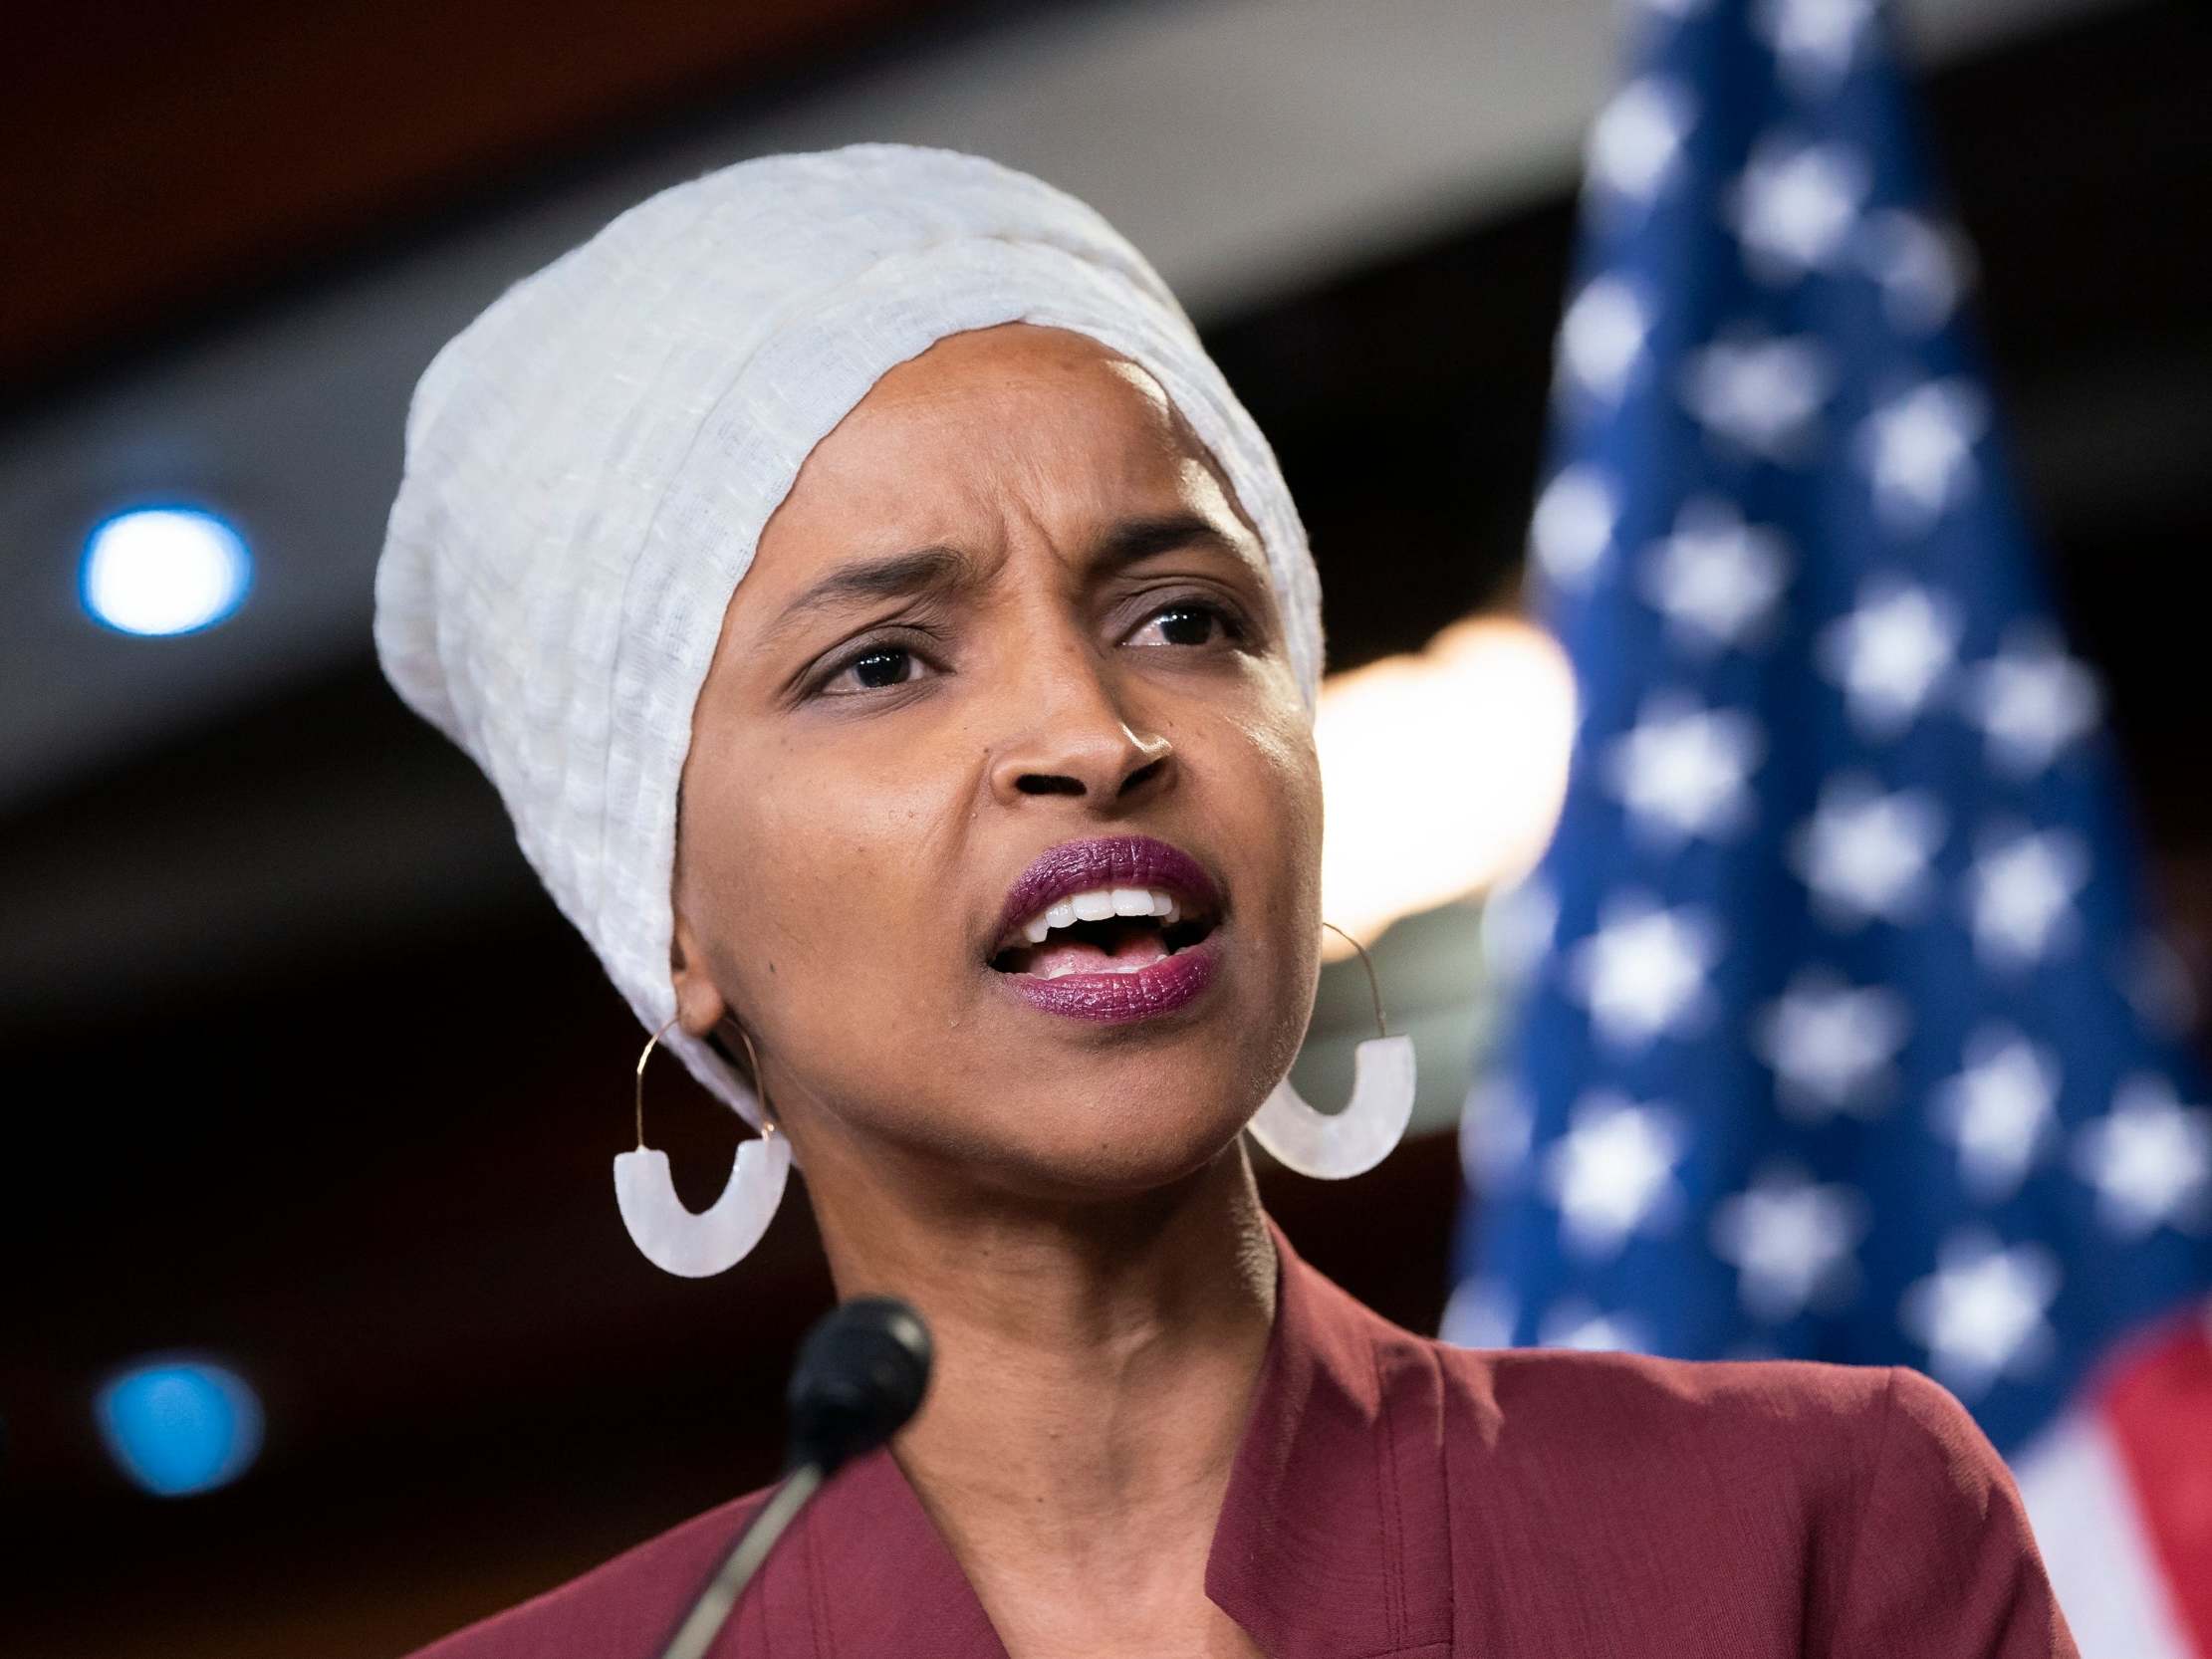 Ilhan Omar was one of the Democrats who appeared alongside Benji Backer at the hearing